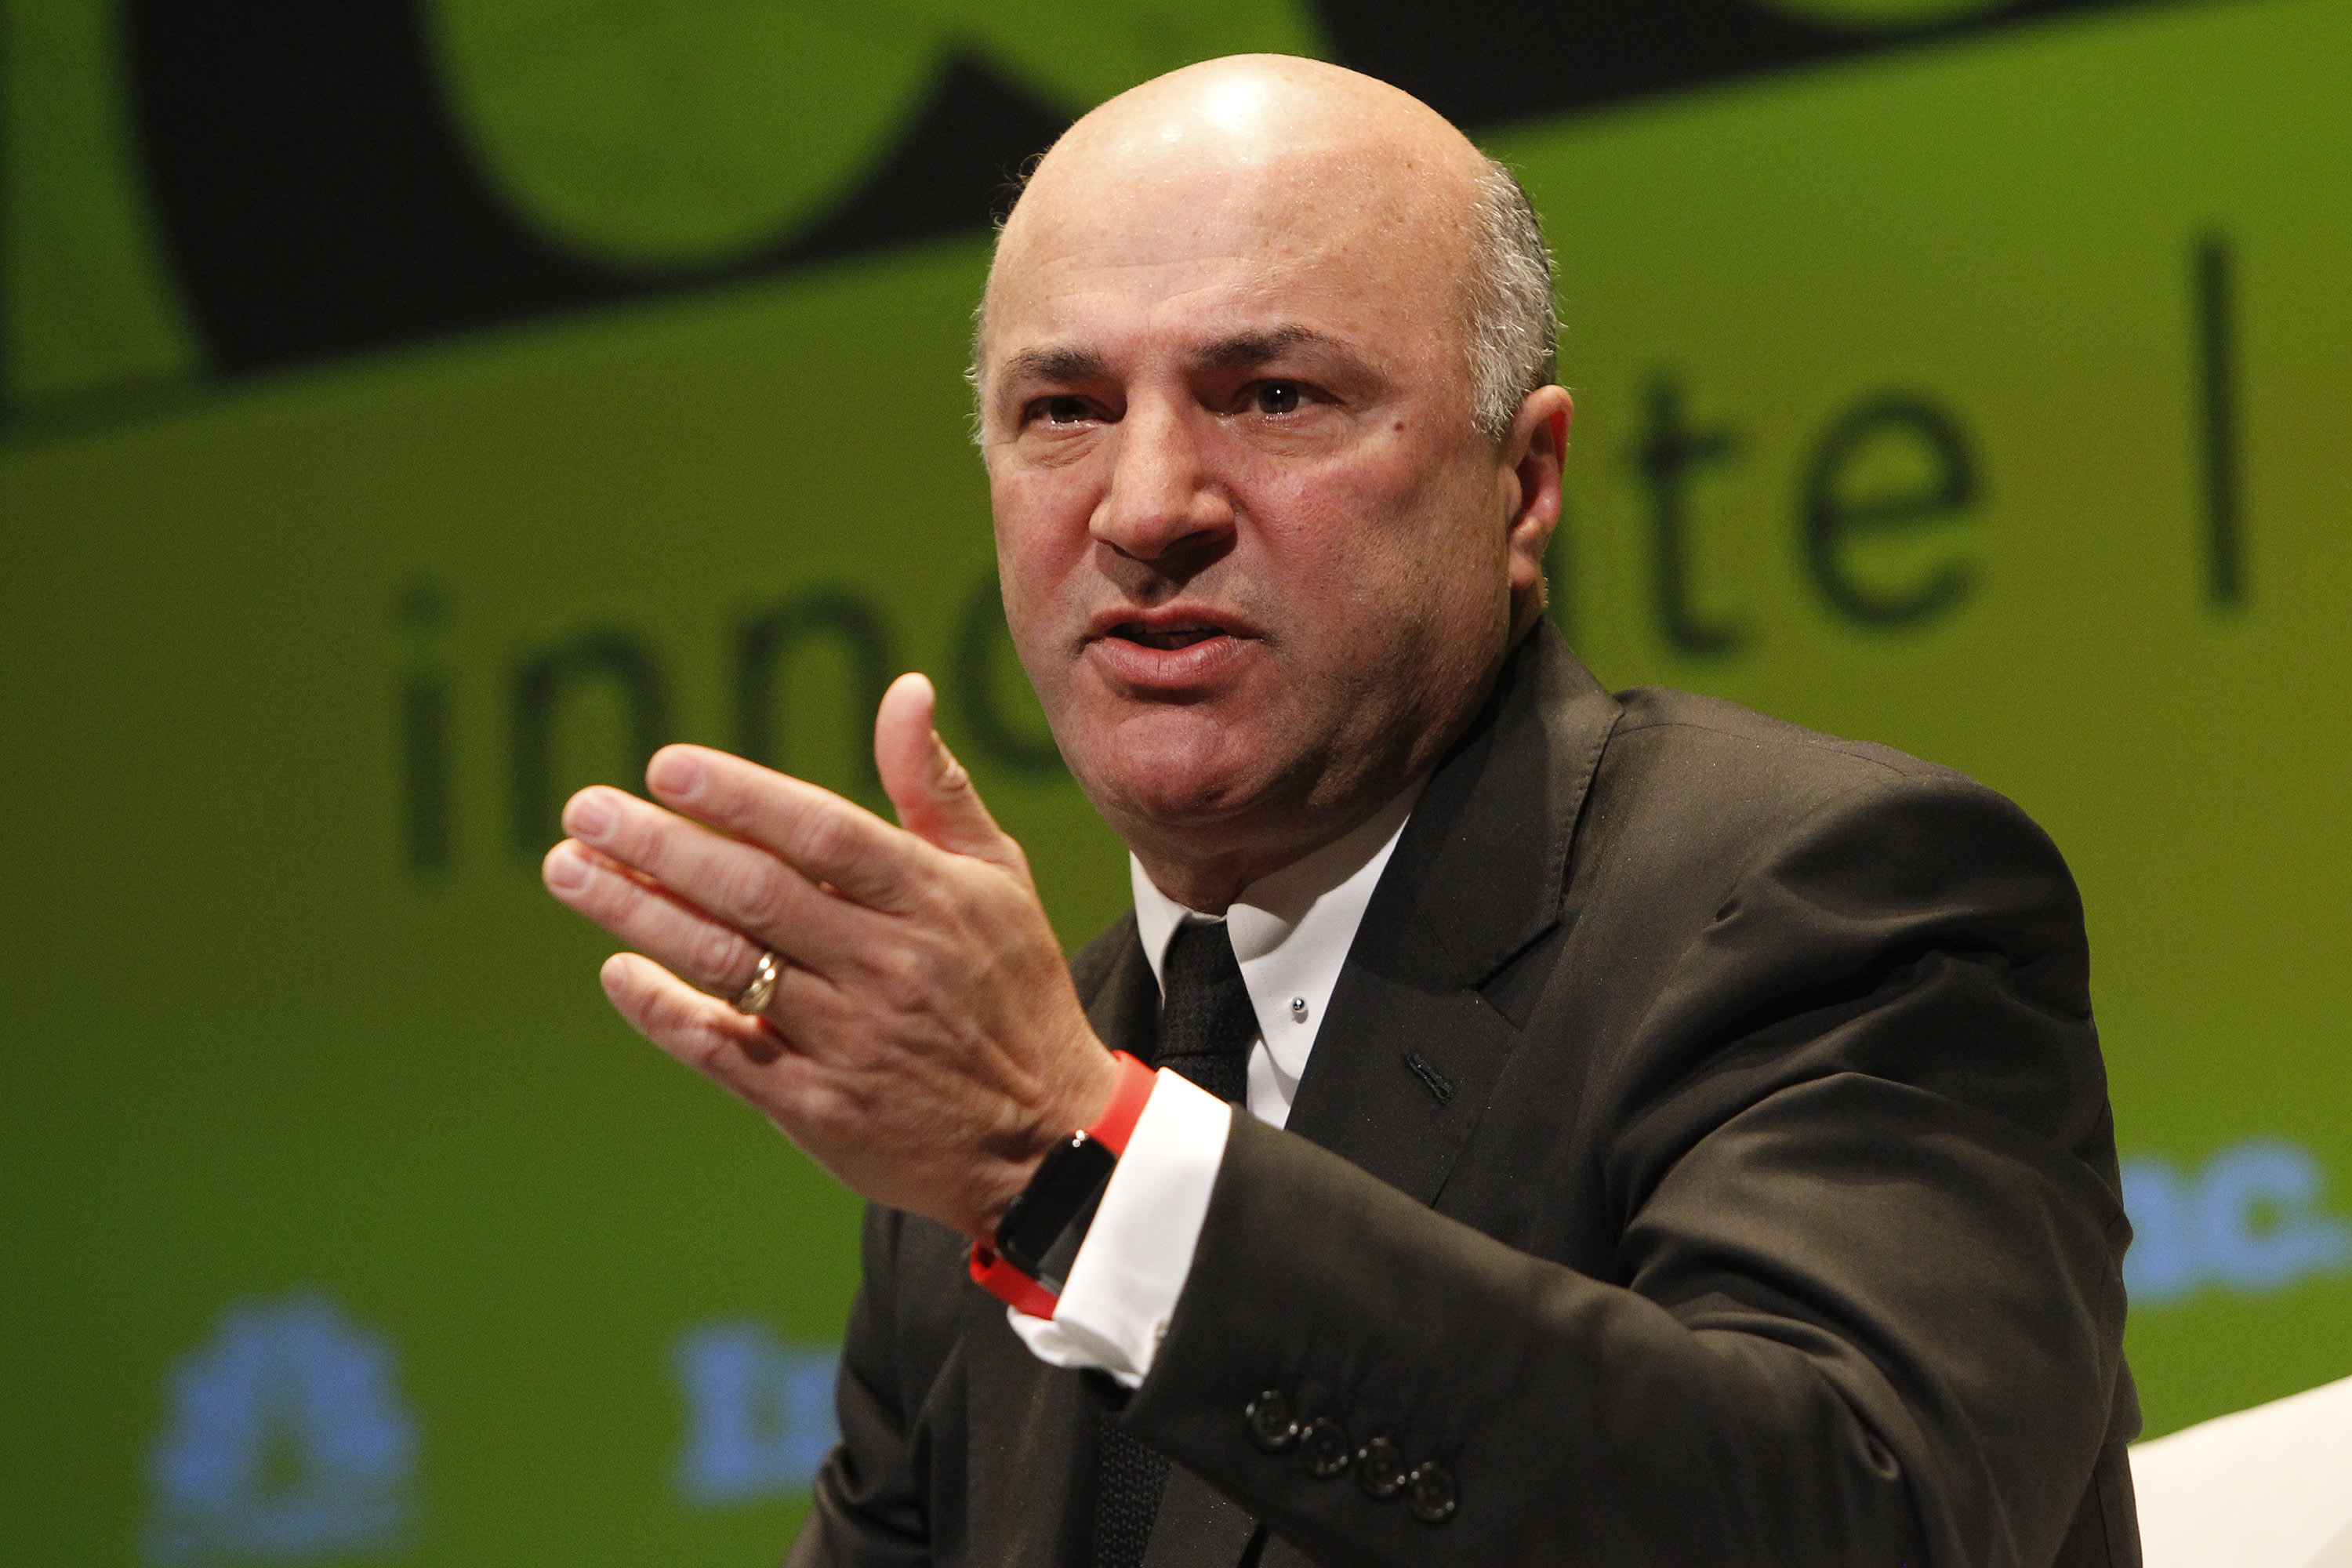 Kevin O’Leary says he’s put 20% of his portfolio in crypto, including tokens and blockchain firms